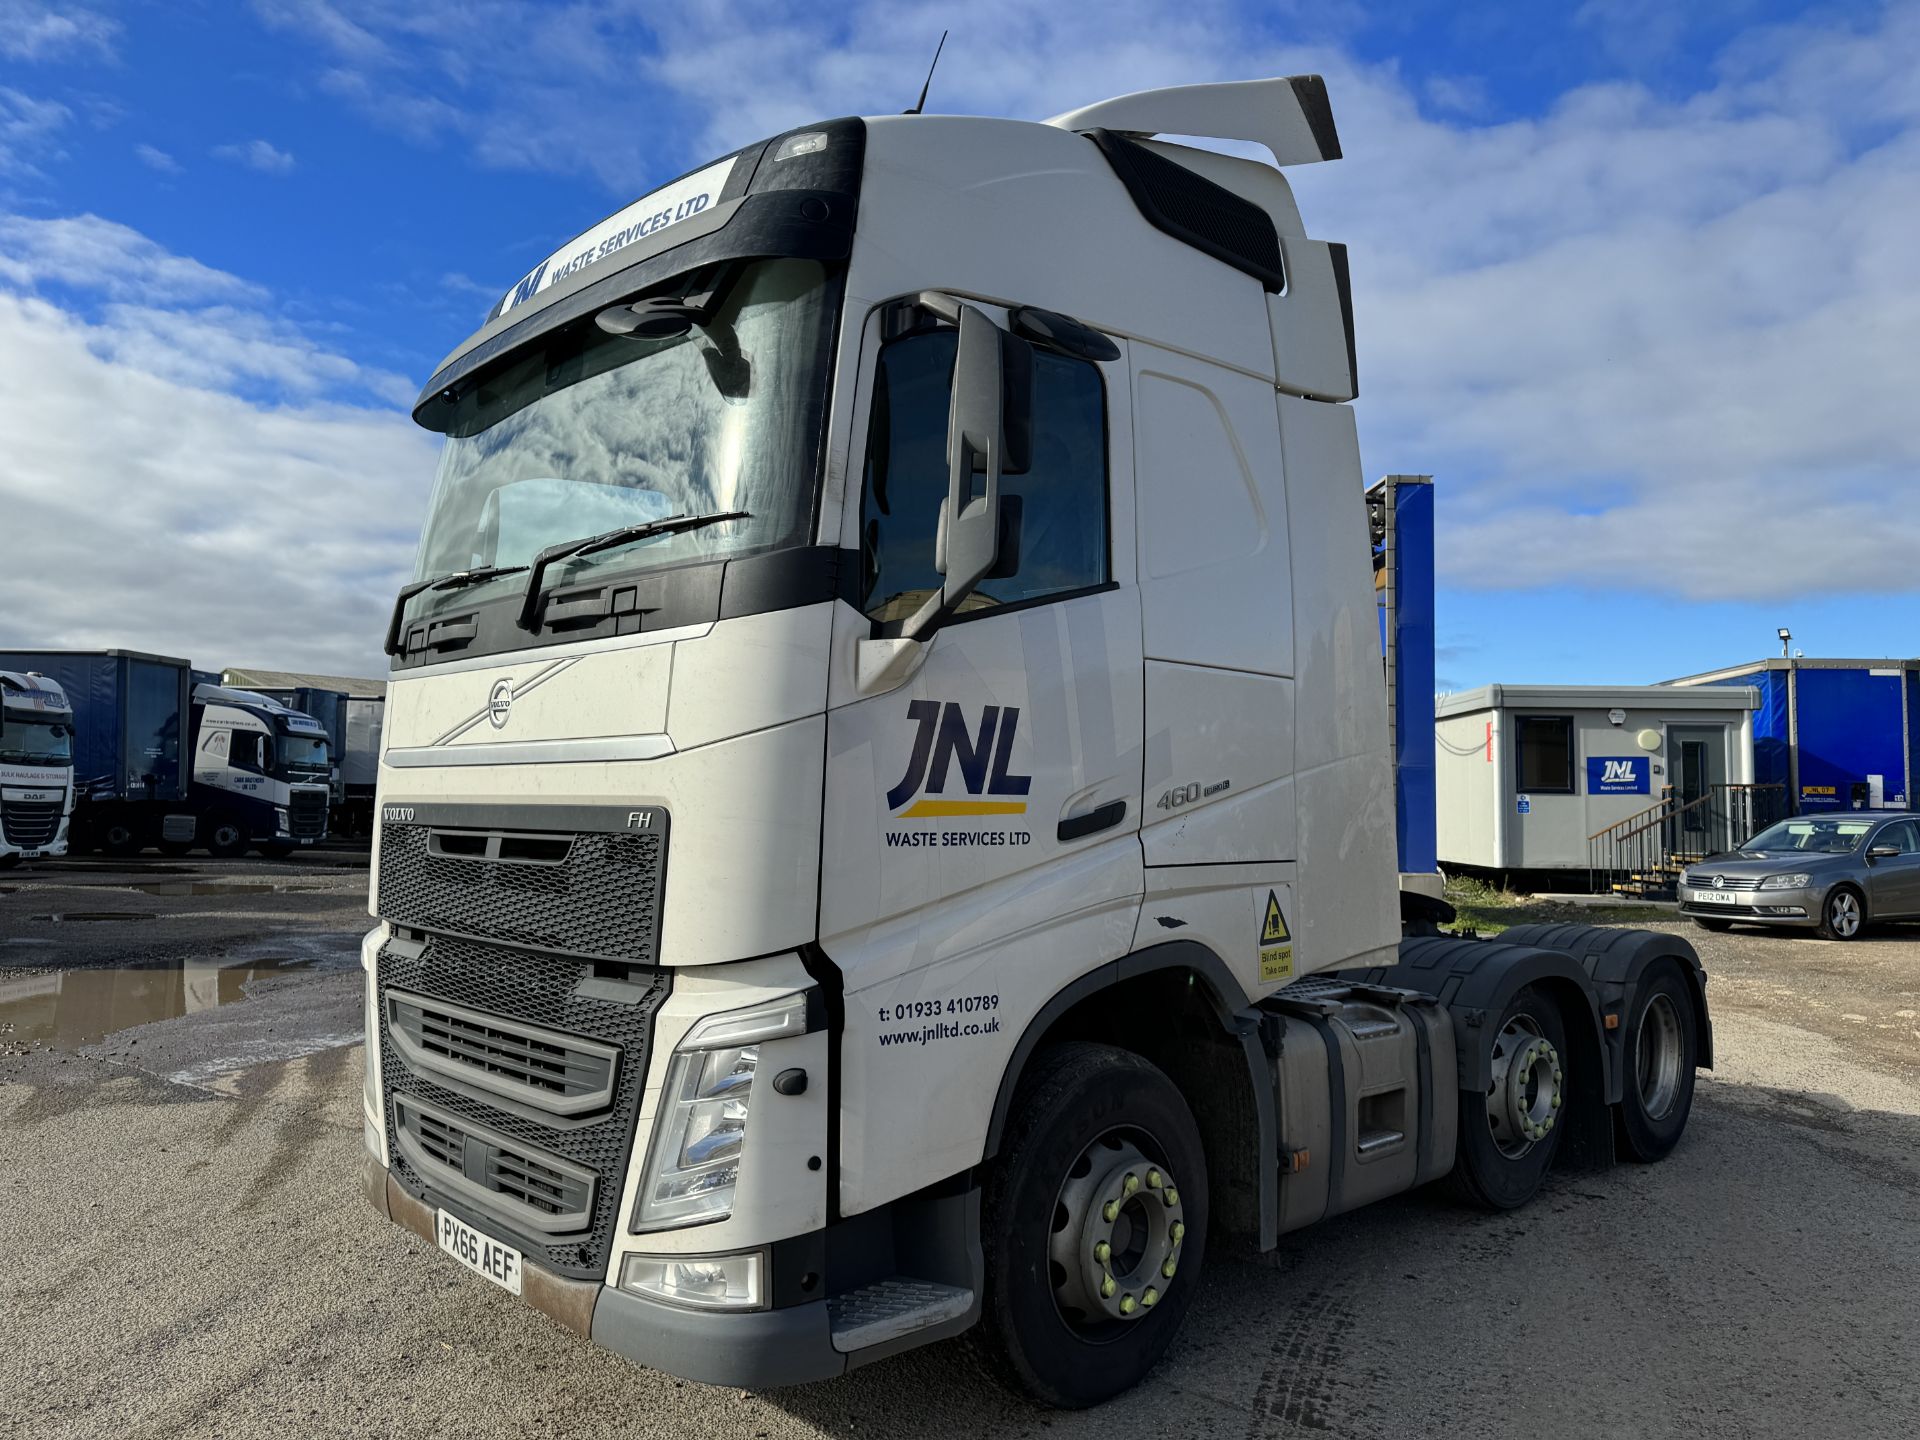 2016 - Volvo FH460 6 x 2 Euro 6 Mid Lift Tractor Unit - Image 4 of 47